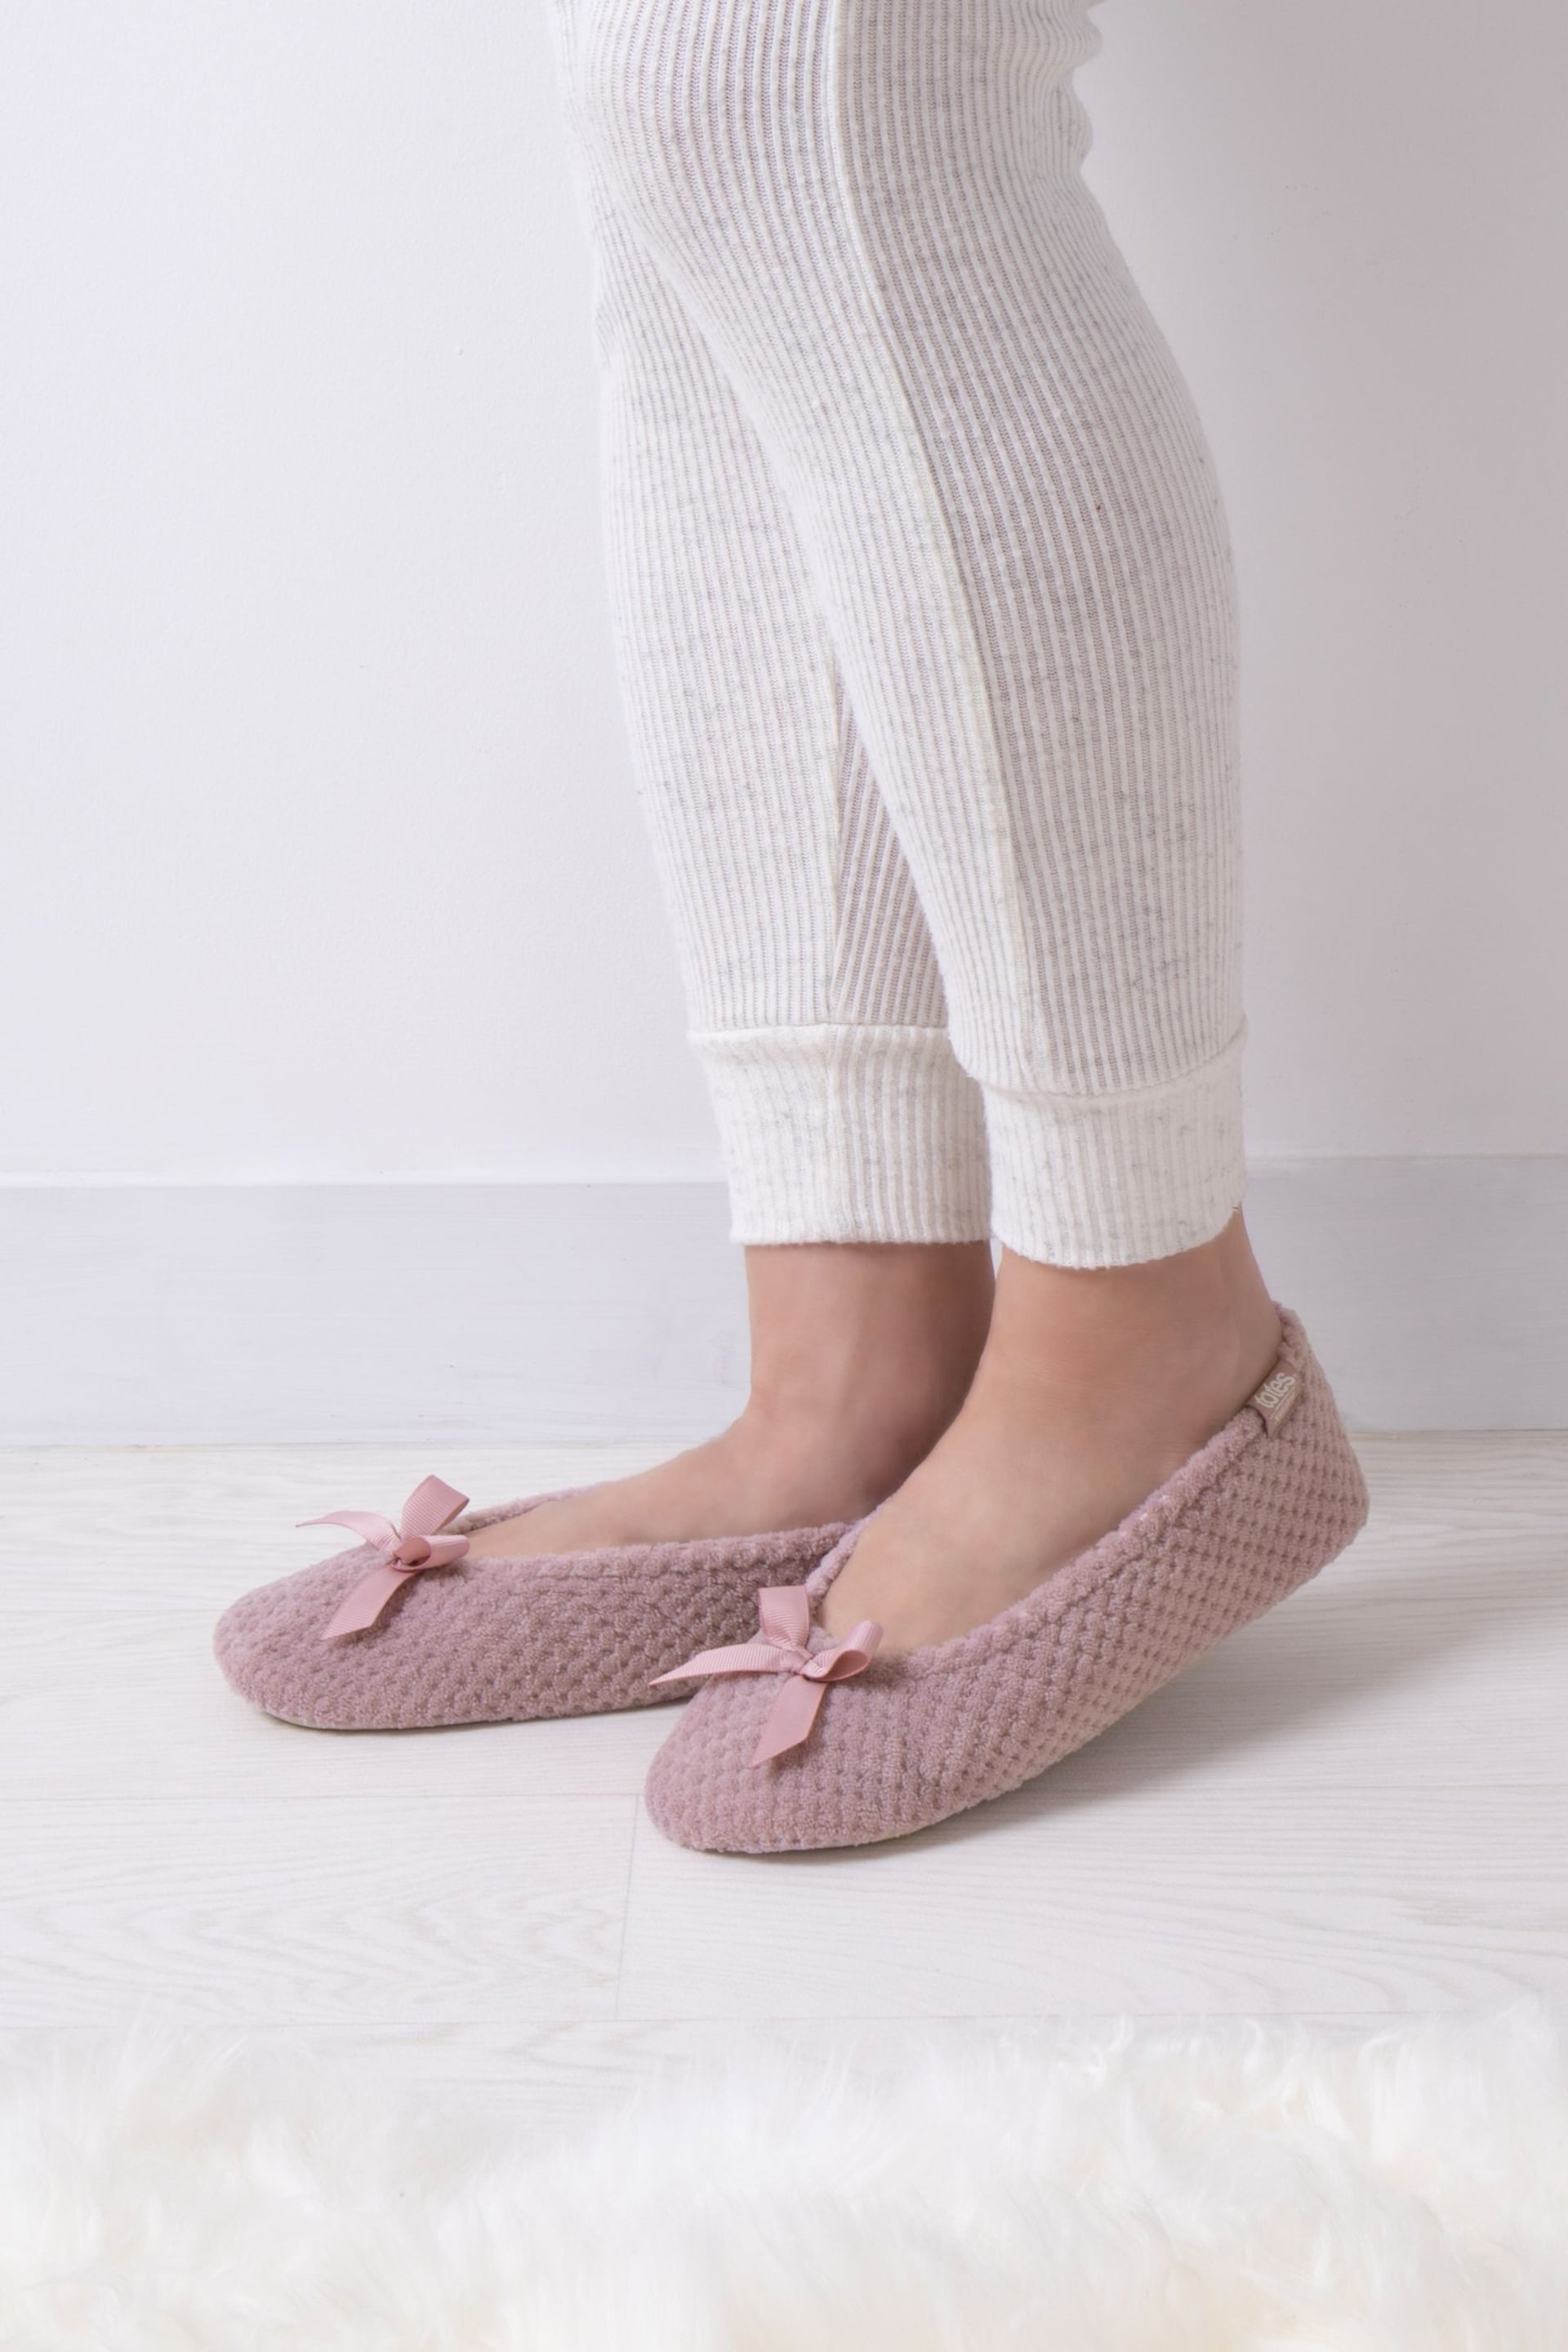 Totes Pink Isotoner Popcorn Slippers - Image 5 of 5